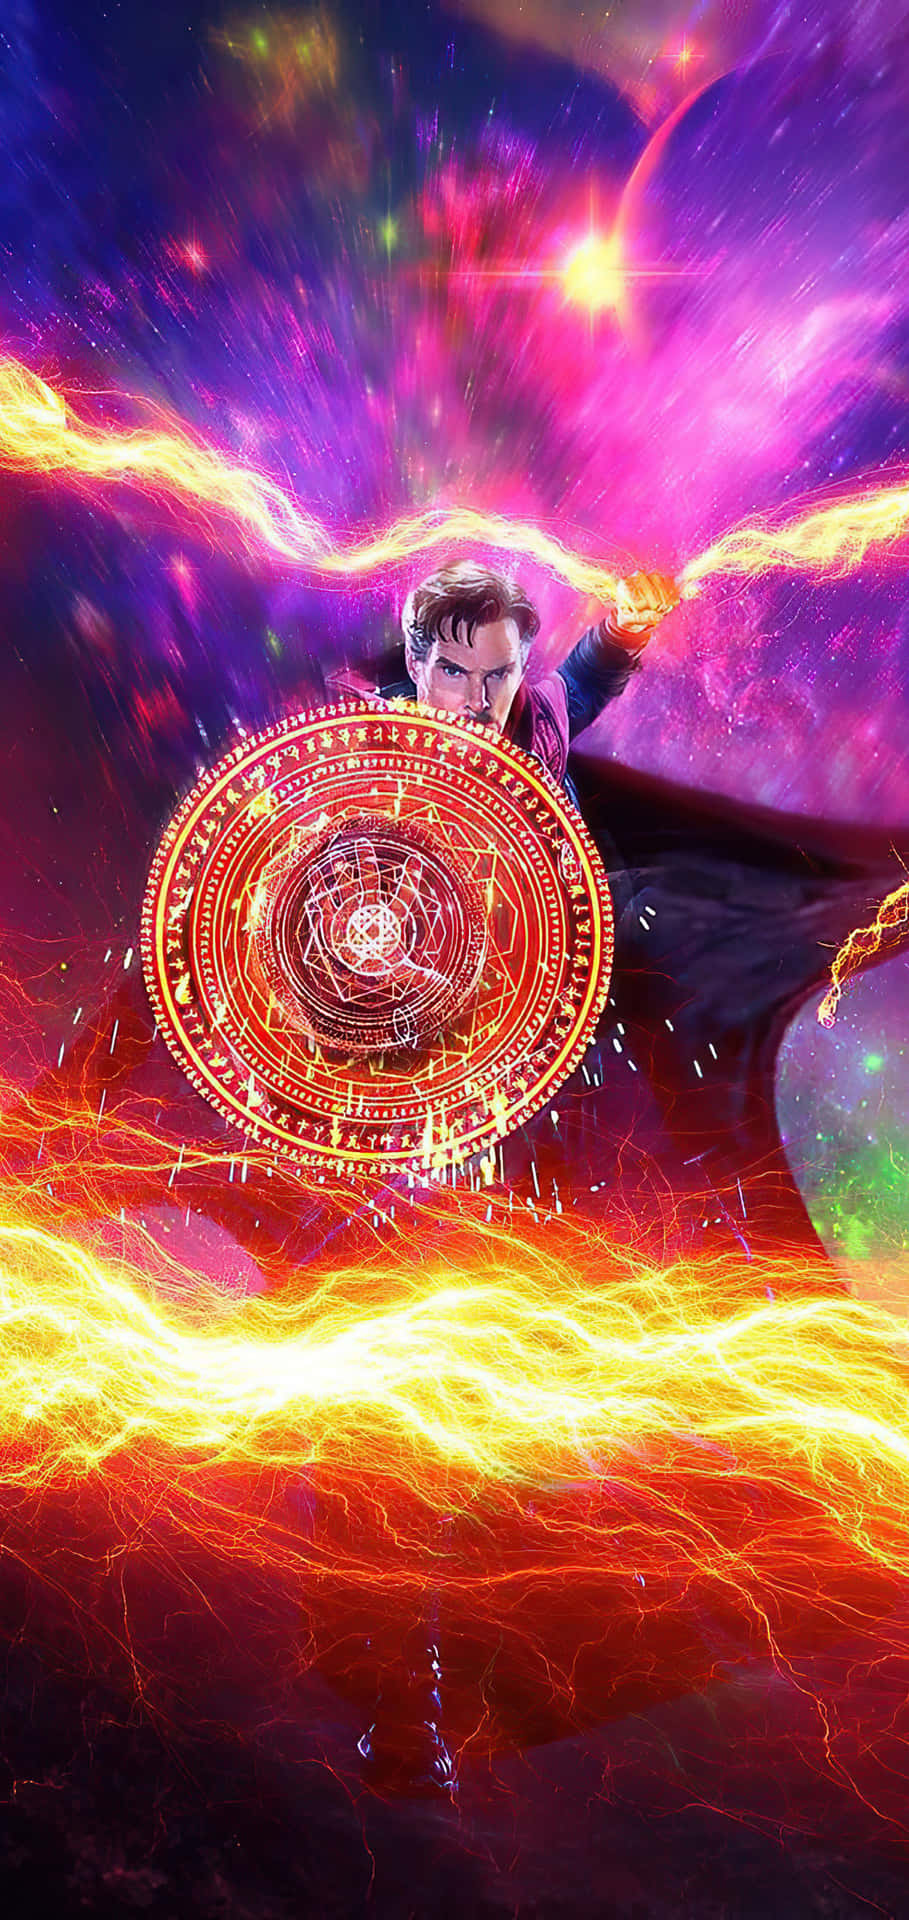 Get Ready to Embrace the Multiverse with Doctor Strange on Your iPhone Wallpaper